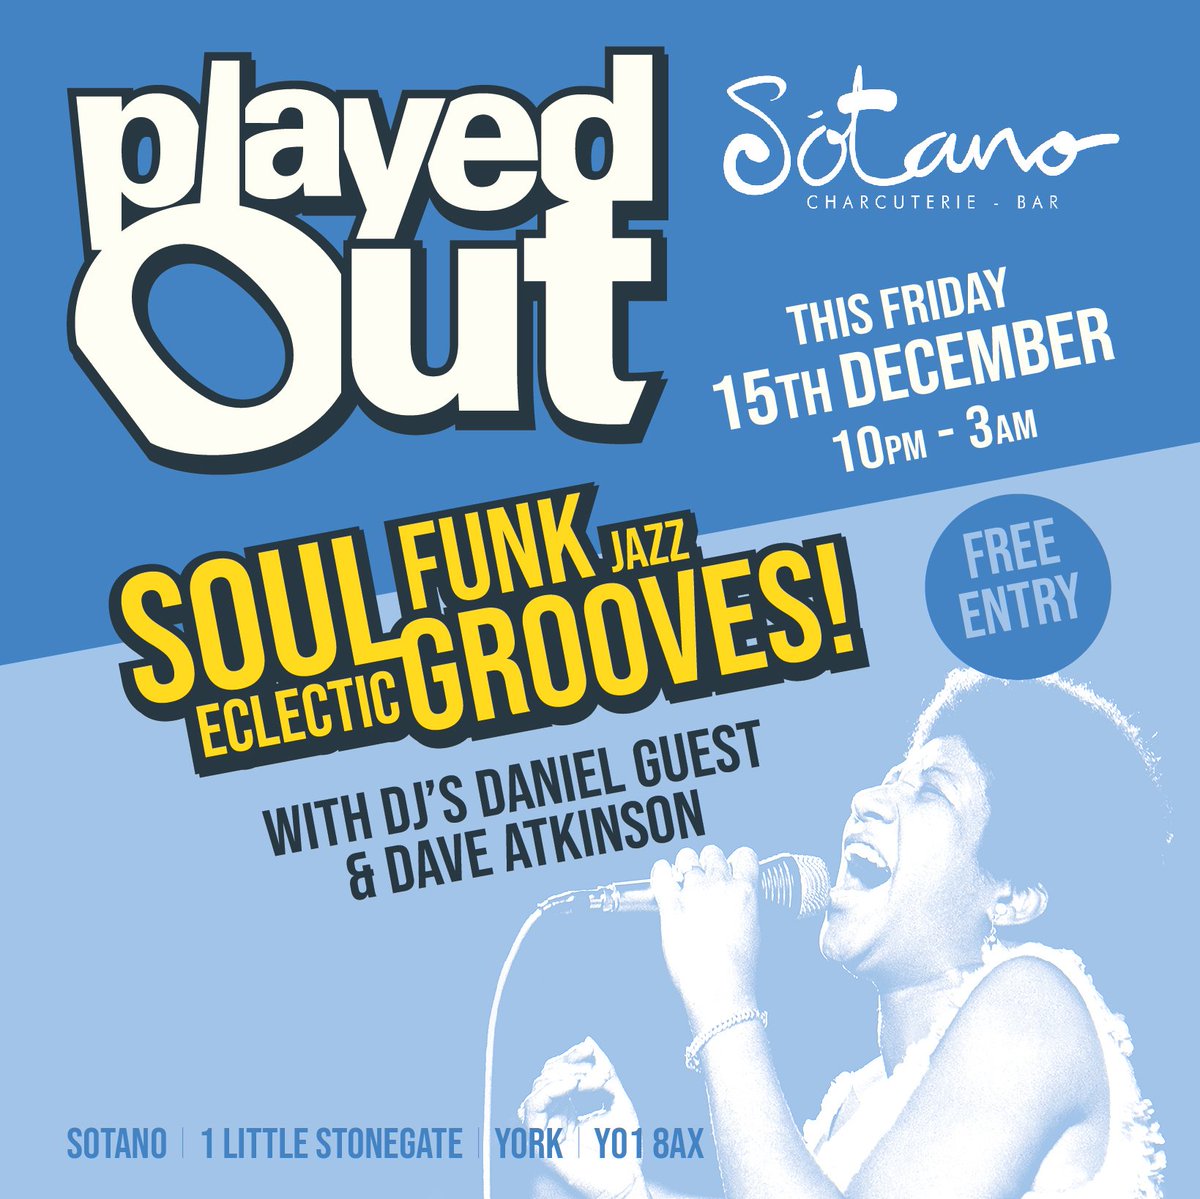 PLAYED OUT - Soul, Funk & Eclectic Grooves! This Friday 15th December at Sotano - York 10pm - 3am - FREE ENTRY with DJ's Daniel Guest & Dave Atkinson Sotano / 1 little Stonegate / York / YO1 8AX